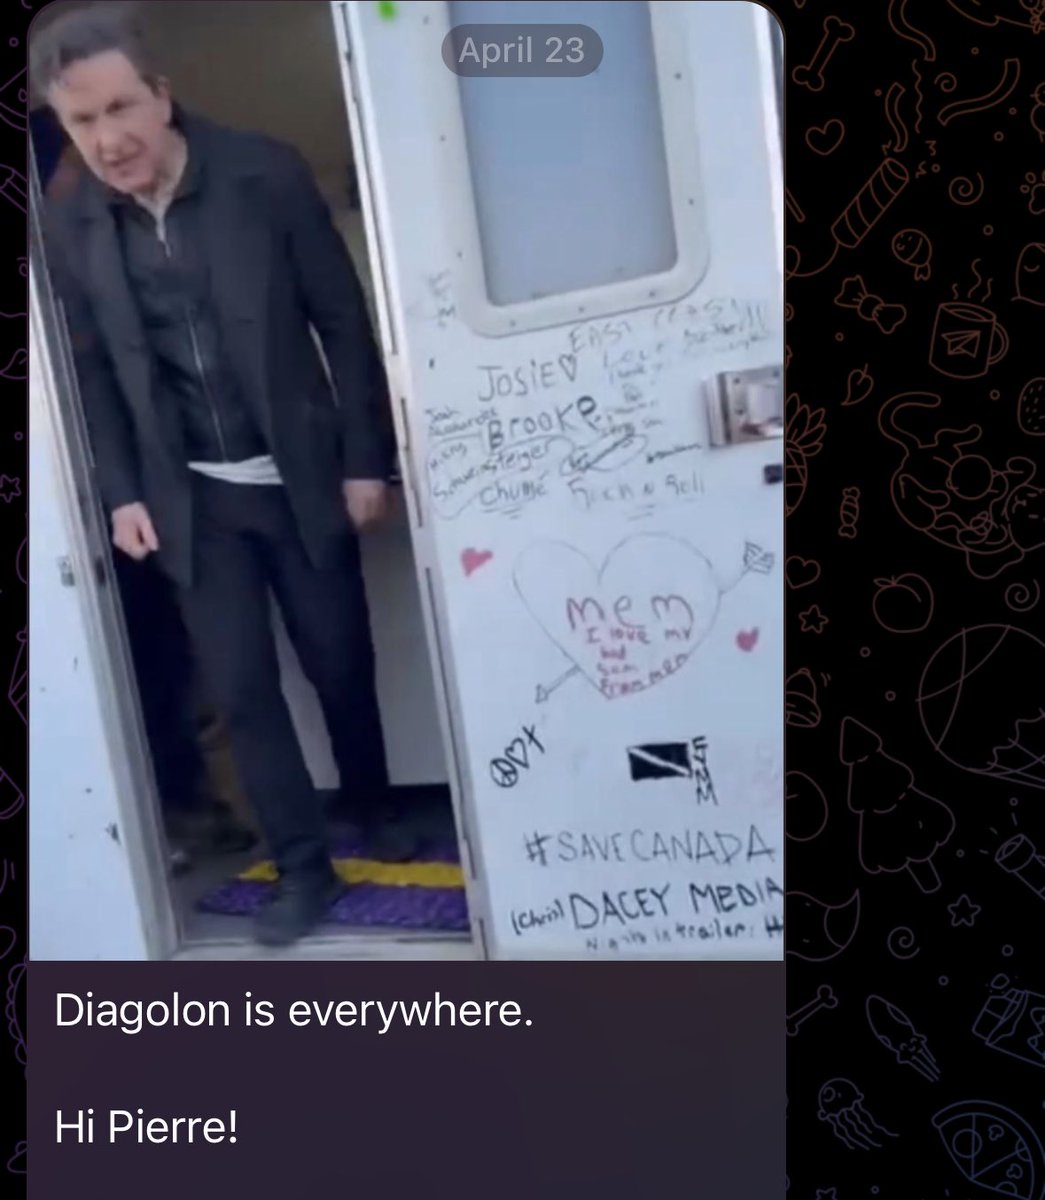 Here’s how Diagolon is reacting to Poilievre being spotted by their symbol. There are more than 15,000 people in this Diagolon Telegram channel. Awesome. Great work everyone.